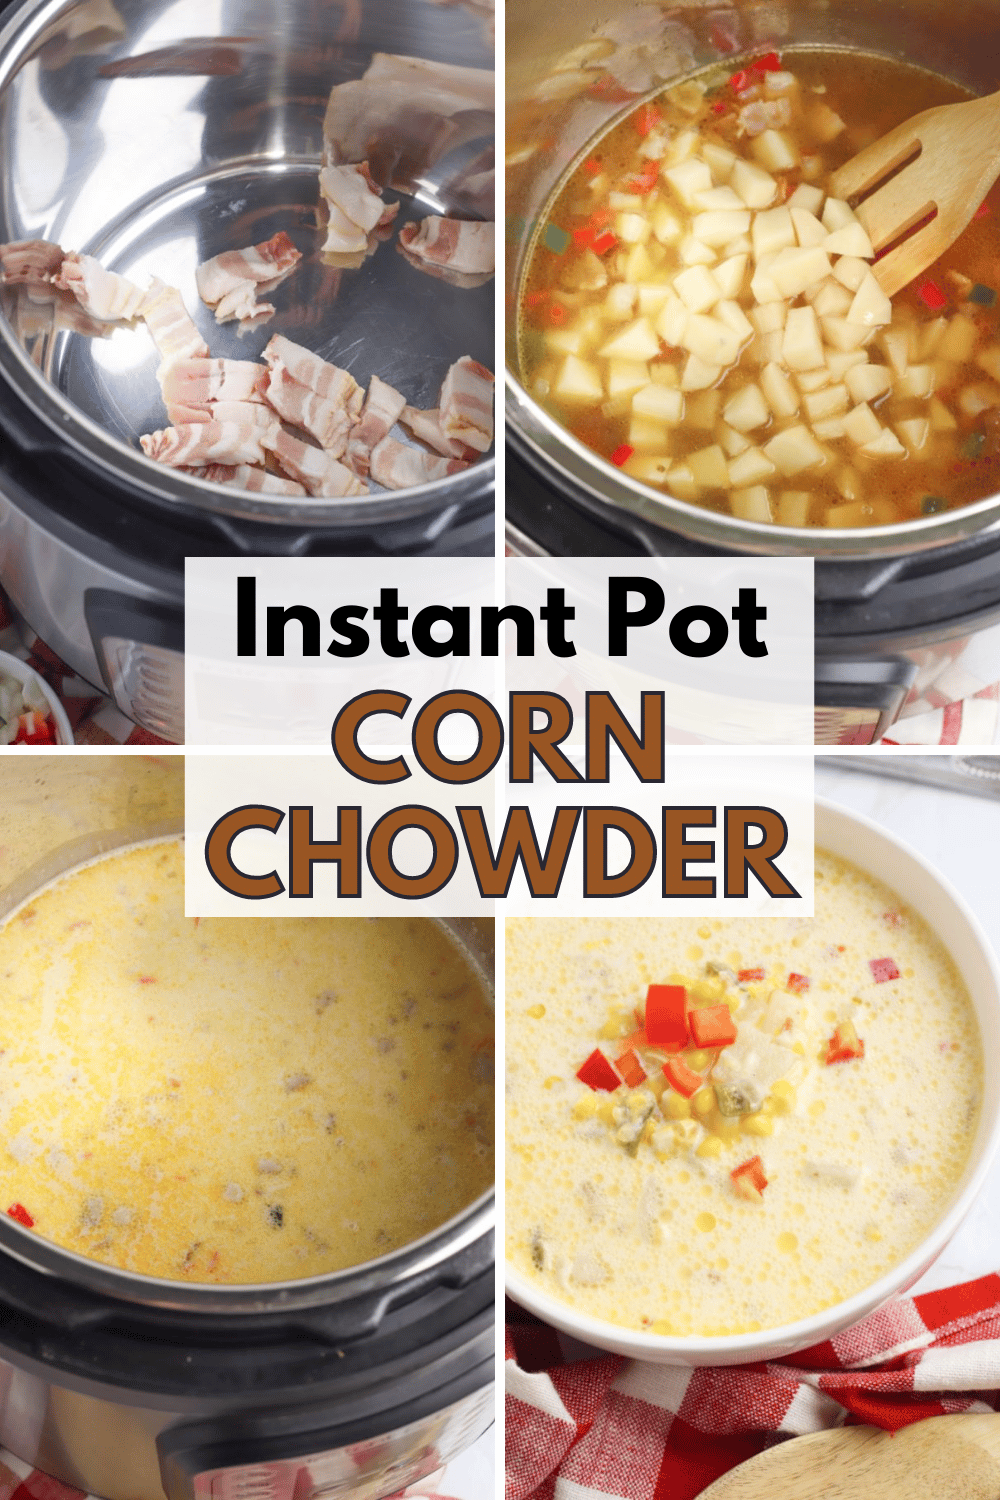 This Instant Pot Corn Chowder is a quick and easy all-in-one recipe that the whole family goes nuts over! Slightly sweet, deliciously creamy and with just a hint of spice. #corn #chowder #instantpotrecipes #pressurecooker #wondermomwannabe via @wondermomwannab